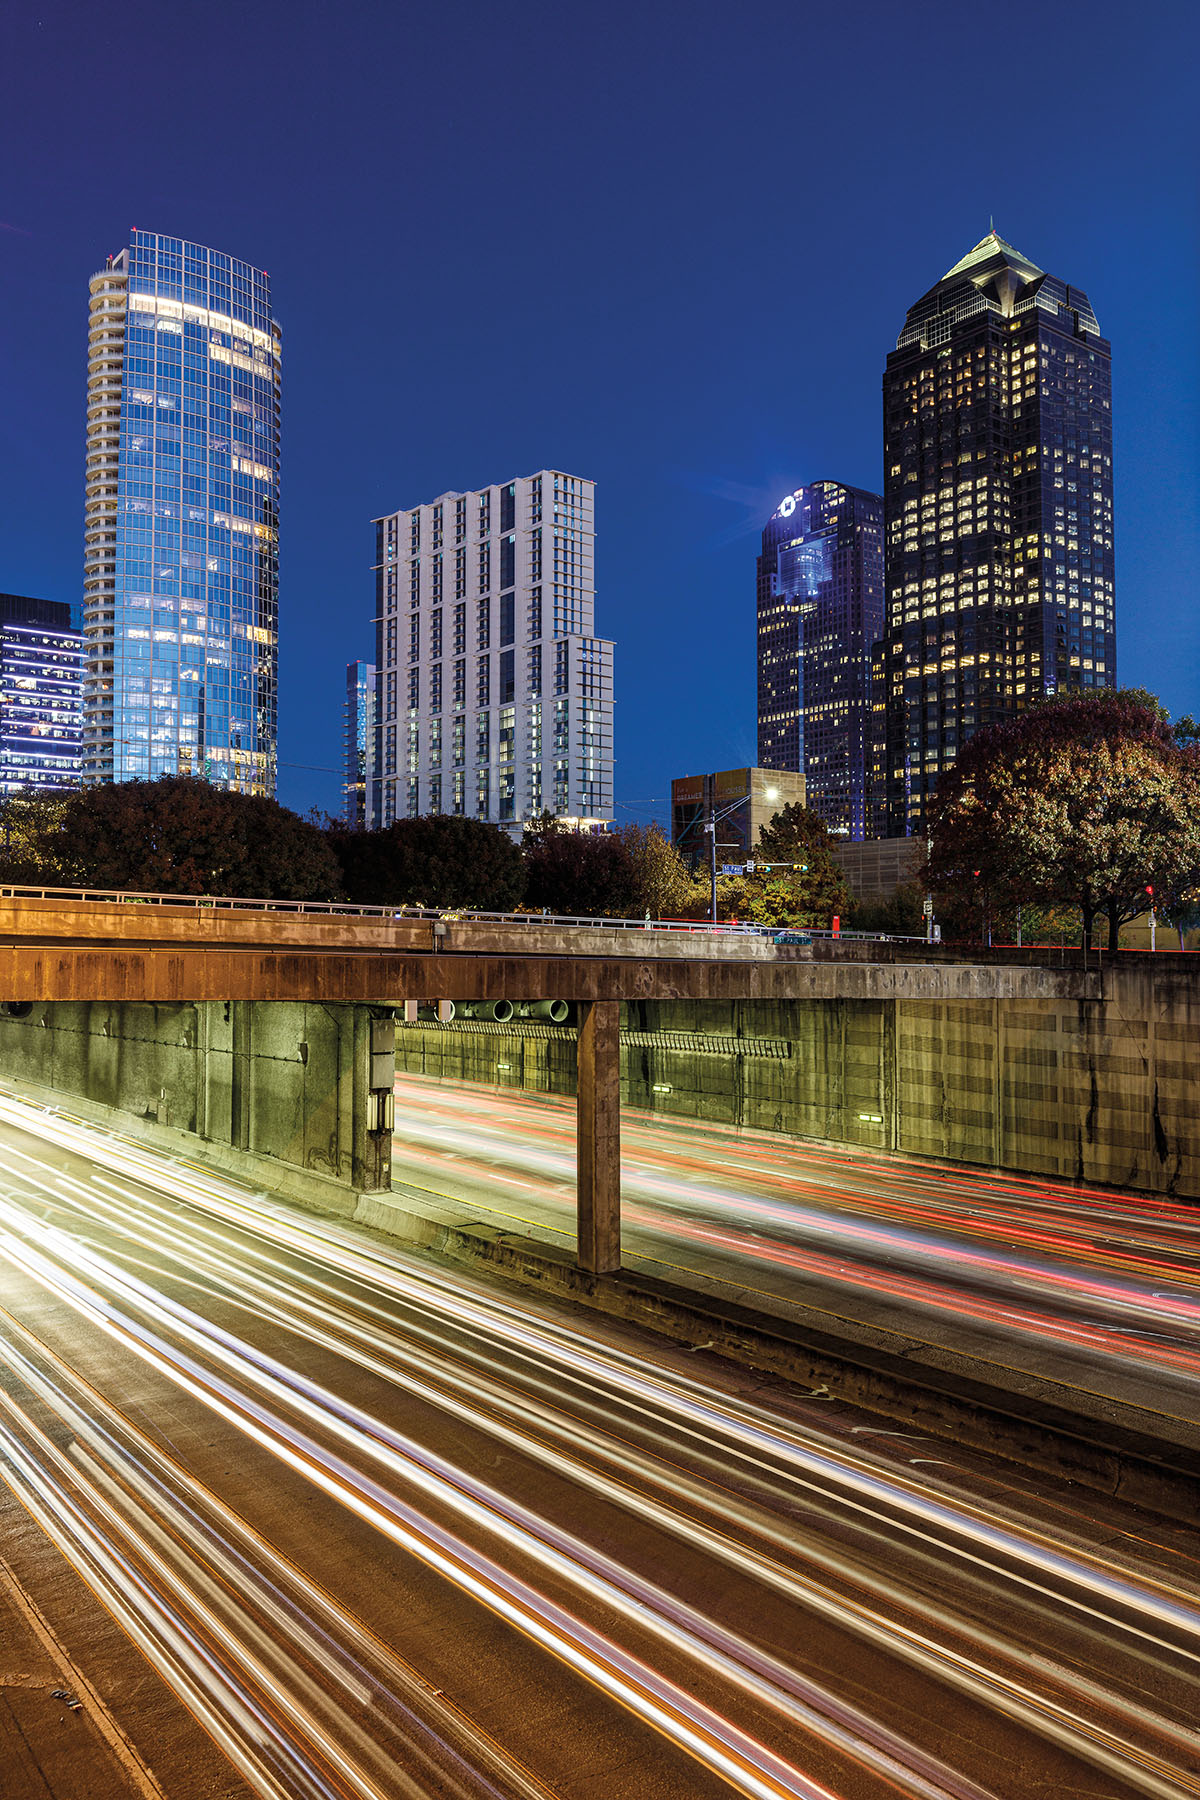 Lights stream from passing vehicles on a freeway below buidlings lit up in downtown Dallas